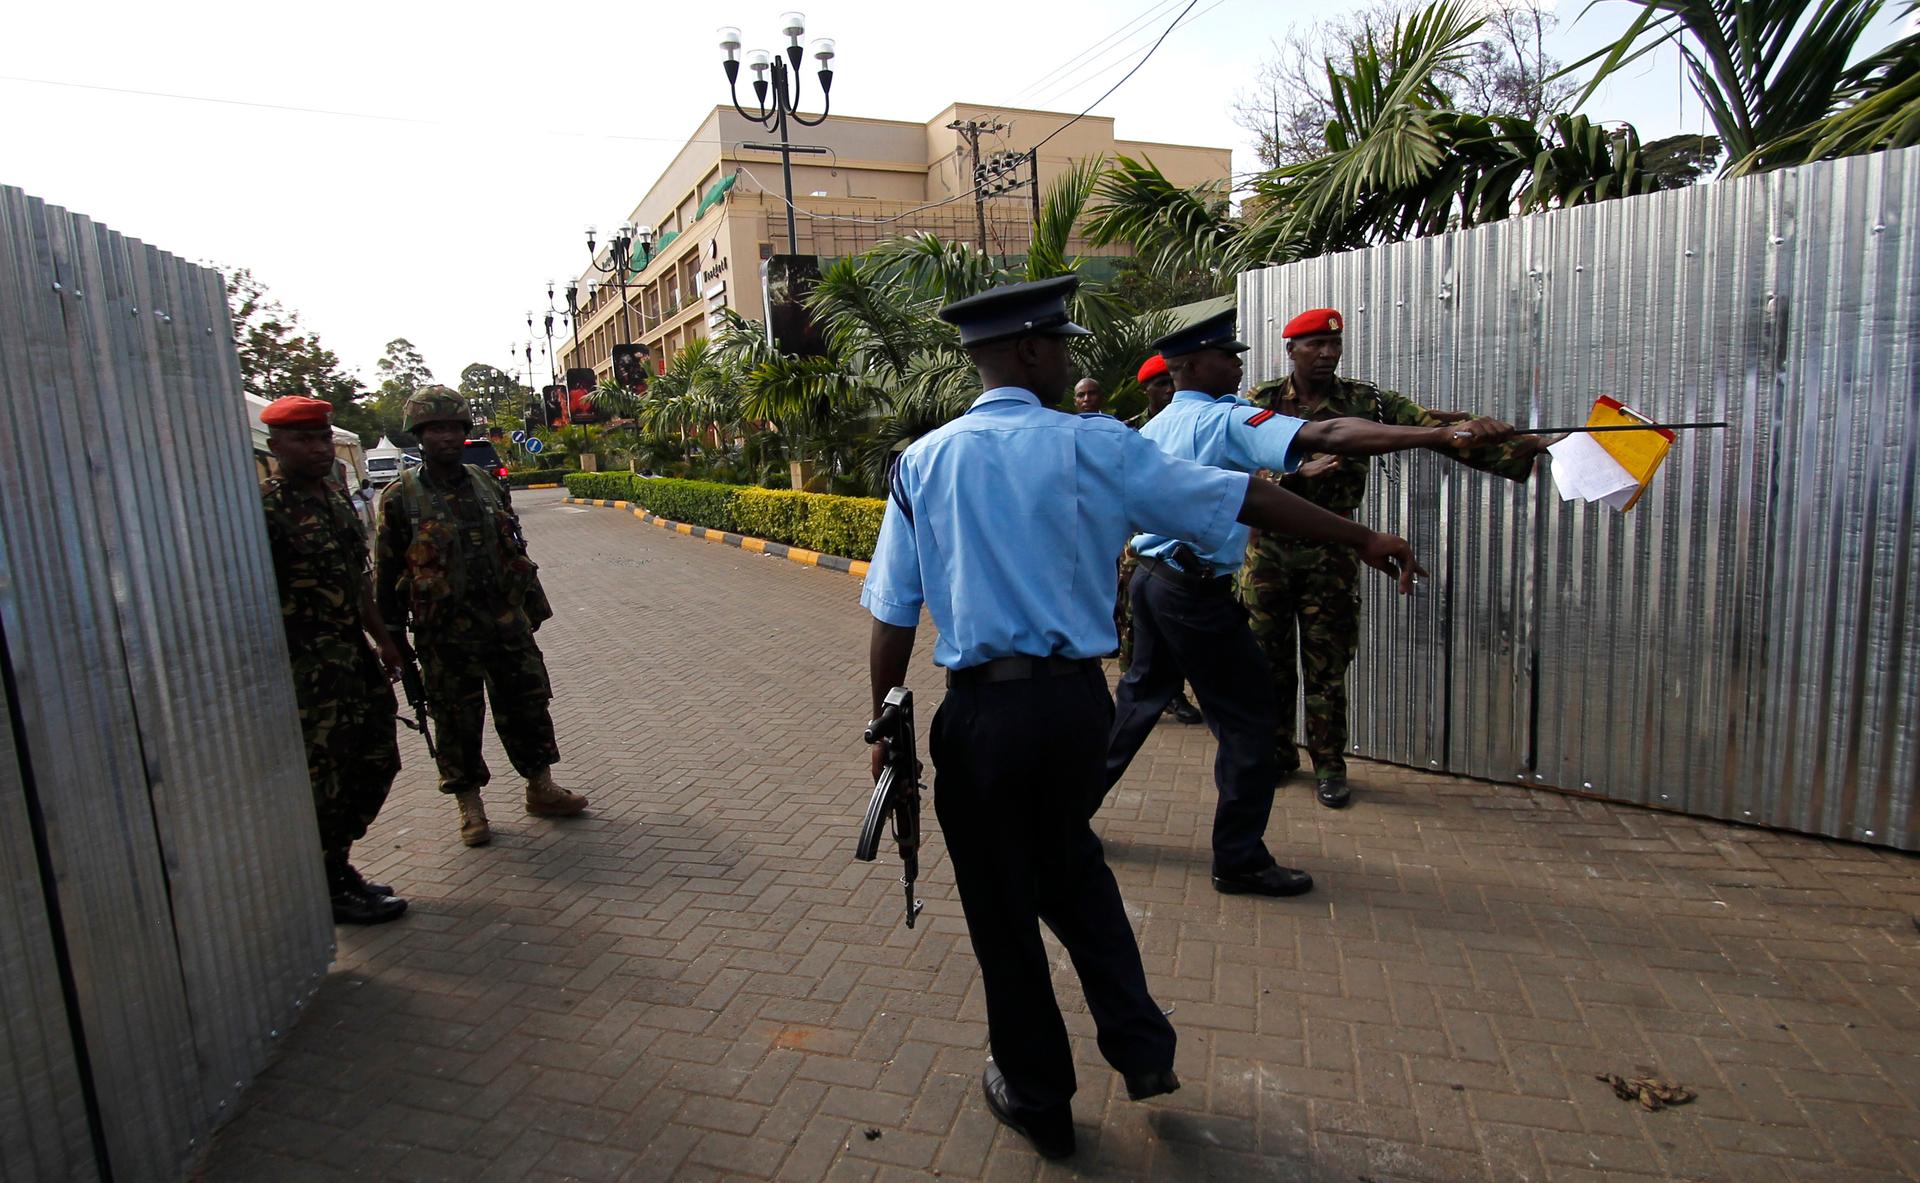 Kenya police and military officers control the temporary entrance erected at the Westgate shopping mall following the recent attack in Kenya's capital Nairobi.